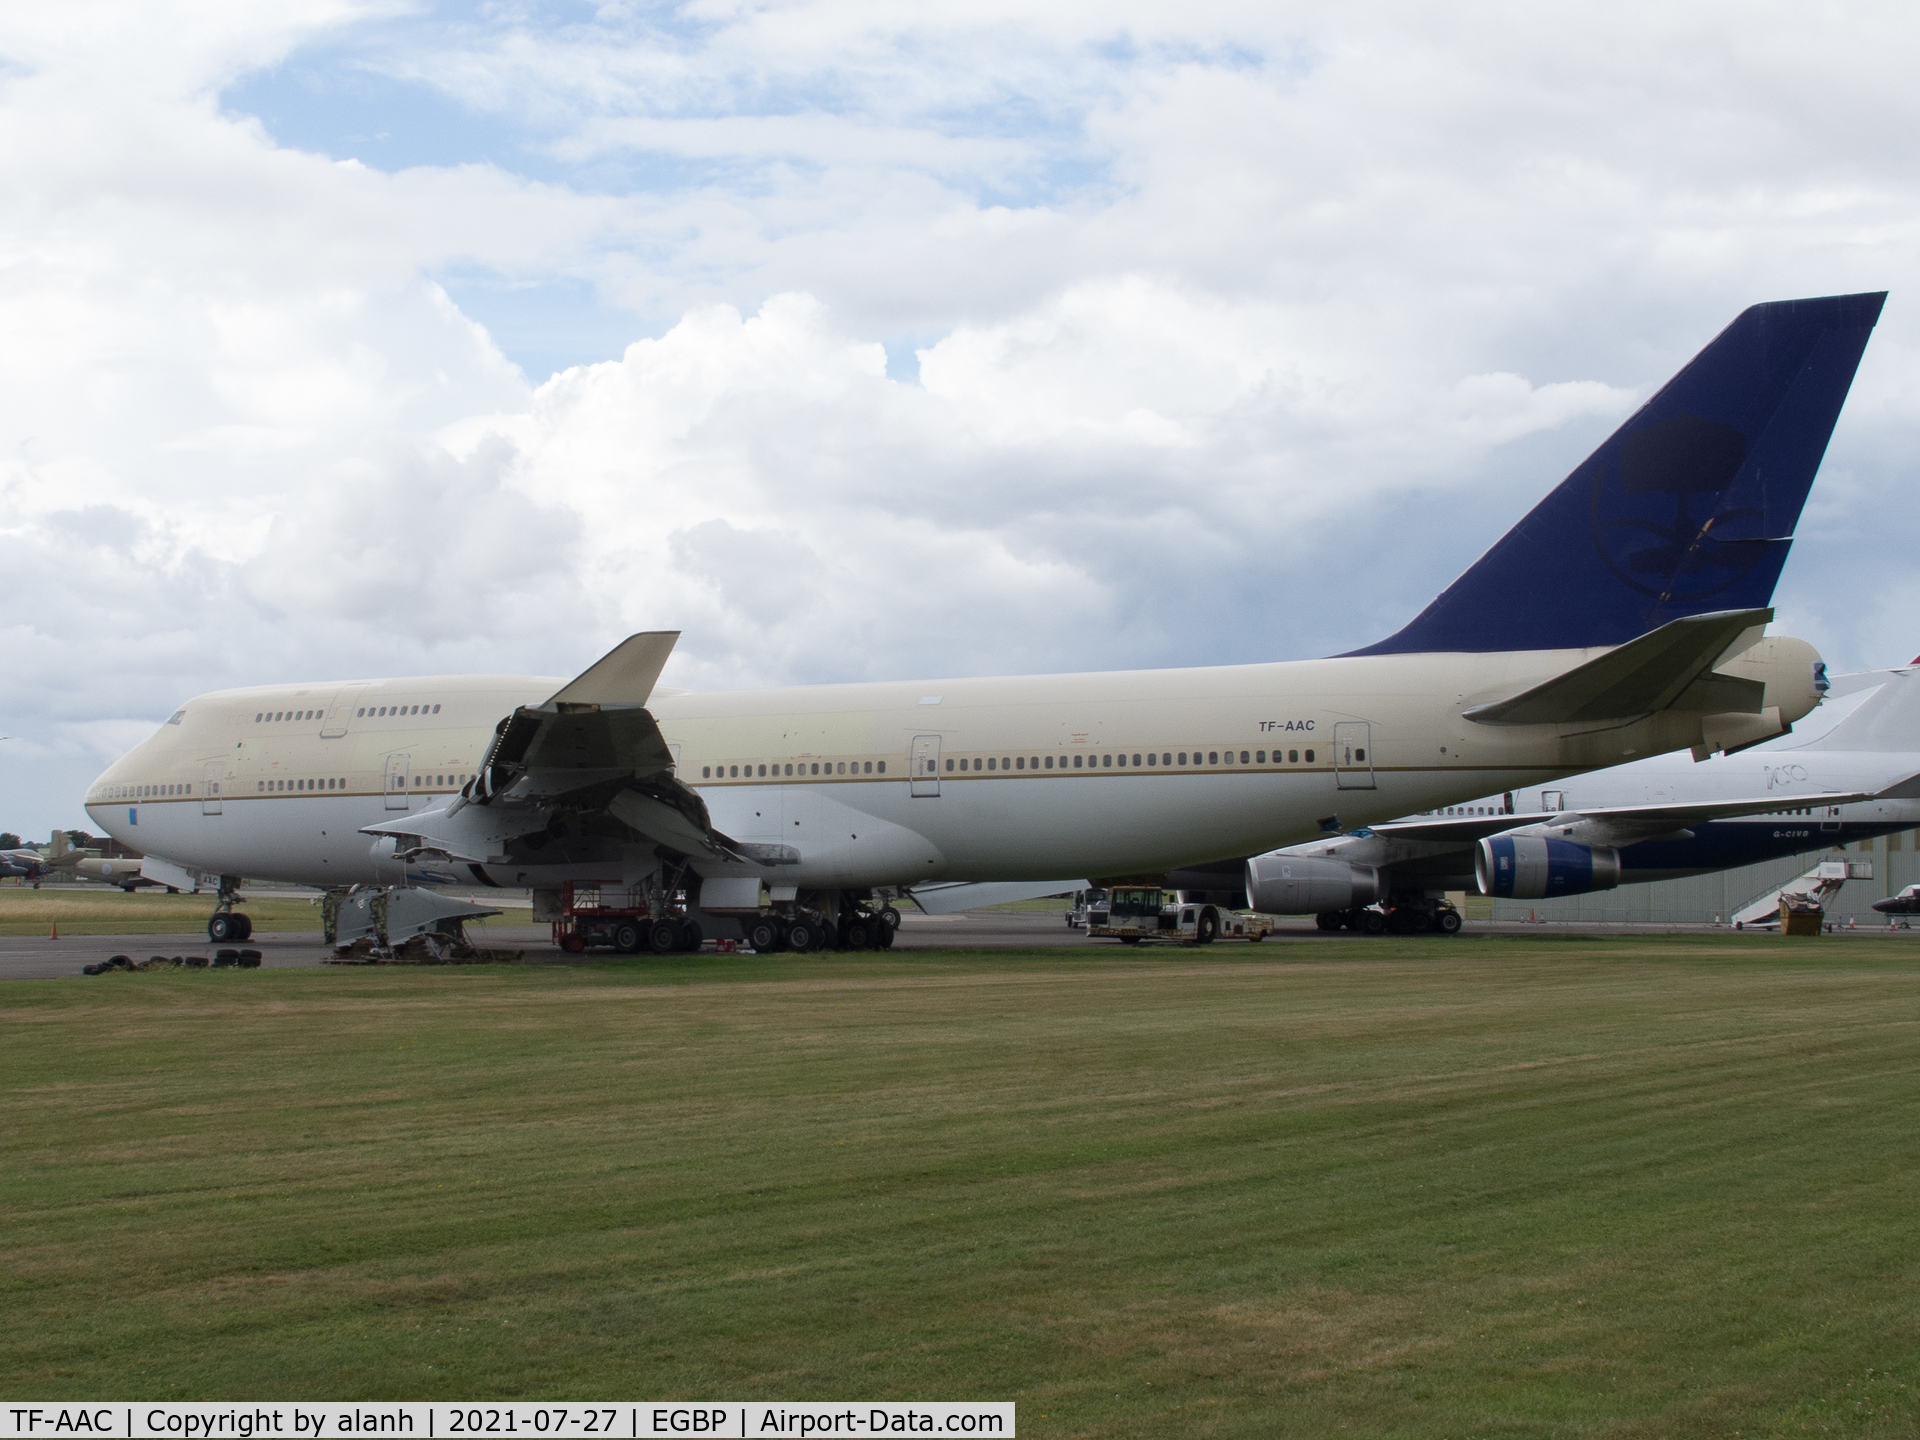 TF-AAC, 1999 Boeing 747-481 C/N 29262, Parting out at Kemble